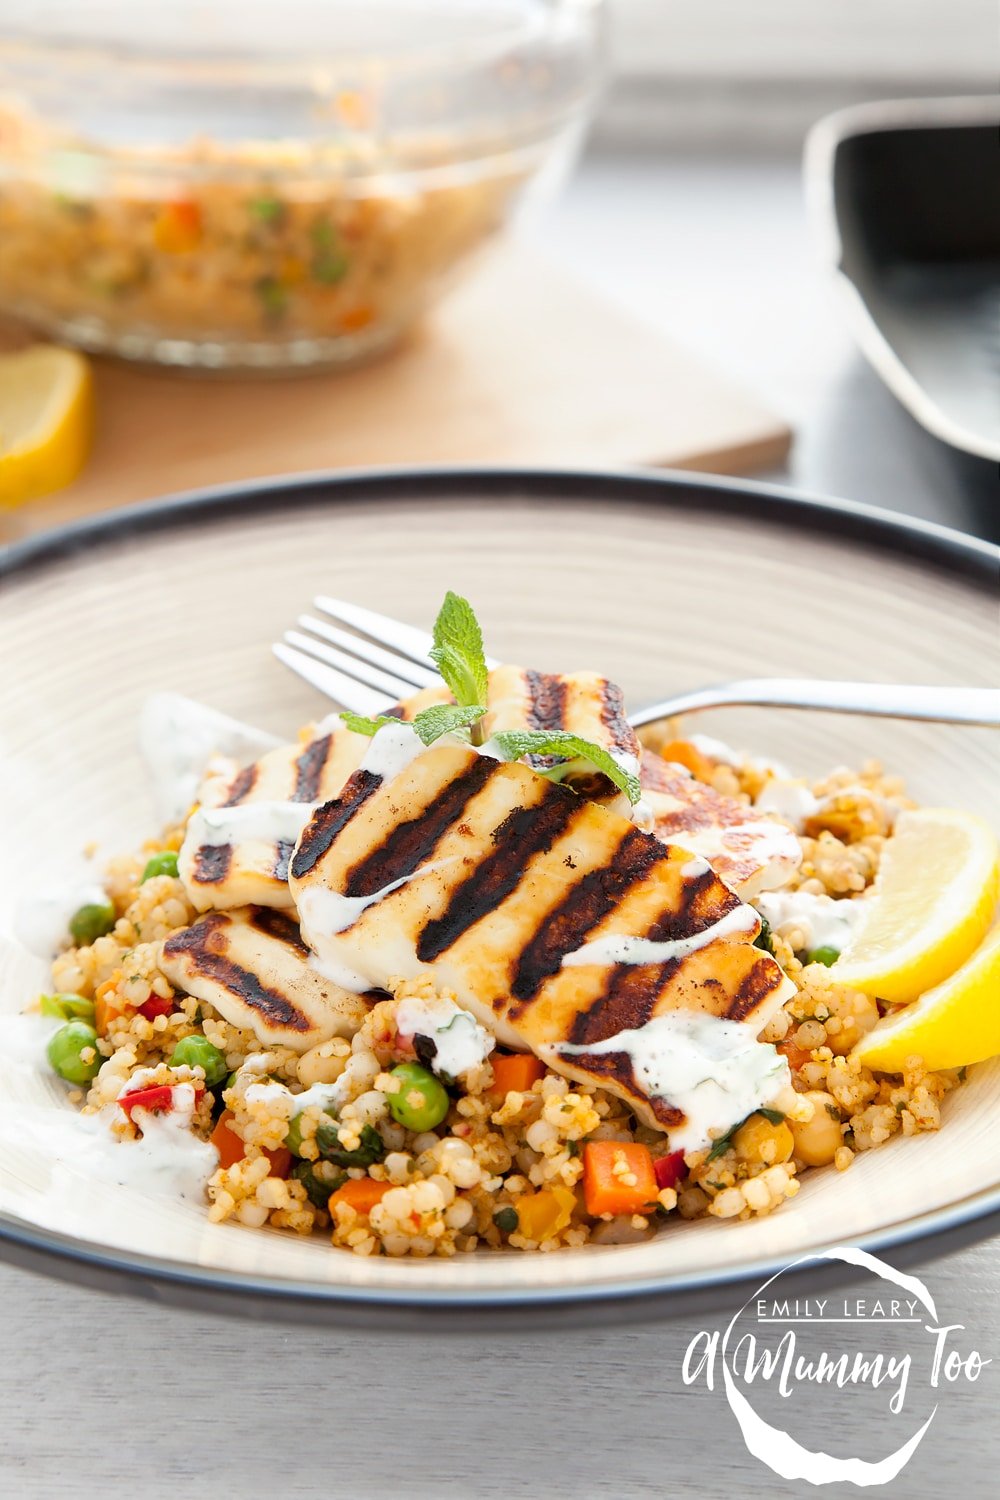 Grilled halloumi vegetable couscous with a yoghurt mint dressing